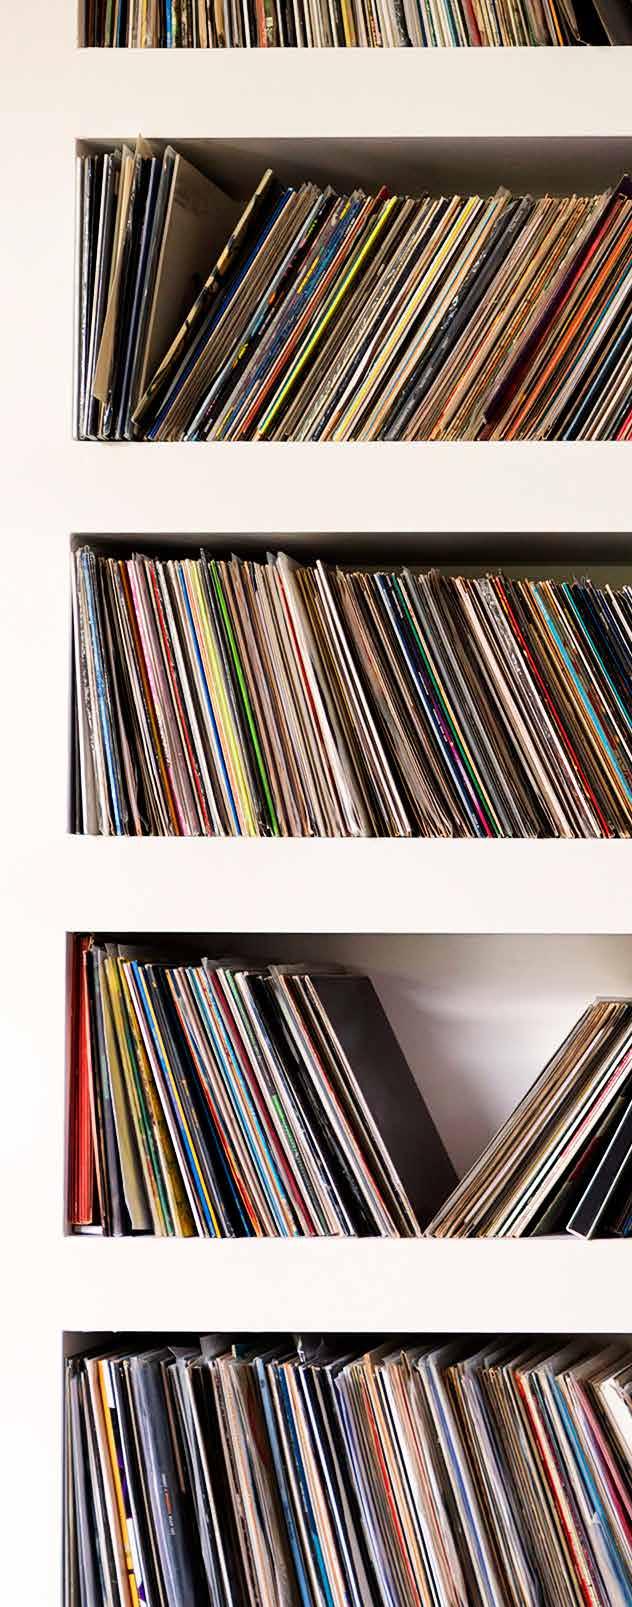 THE ART OF SOUND 1CONTENT Whether it s a stack of CDs, a shelf of vinyl, a hard drive with your digital collection, or a streaming music service, what you want to listen to is where you ll start.